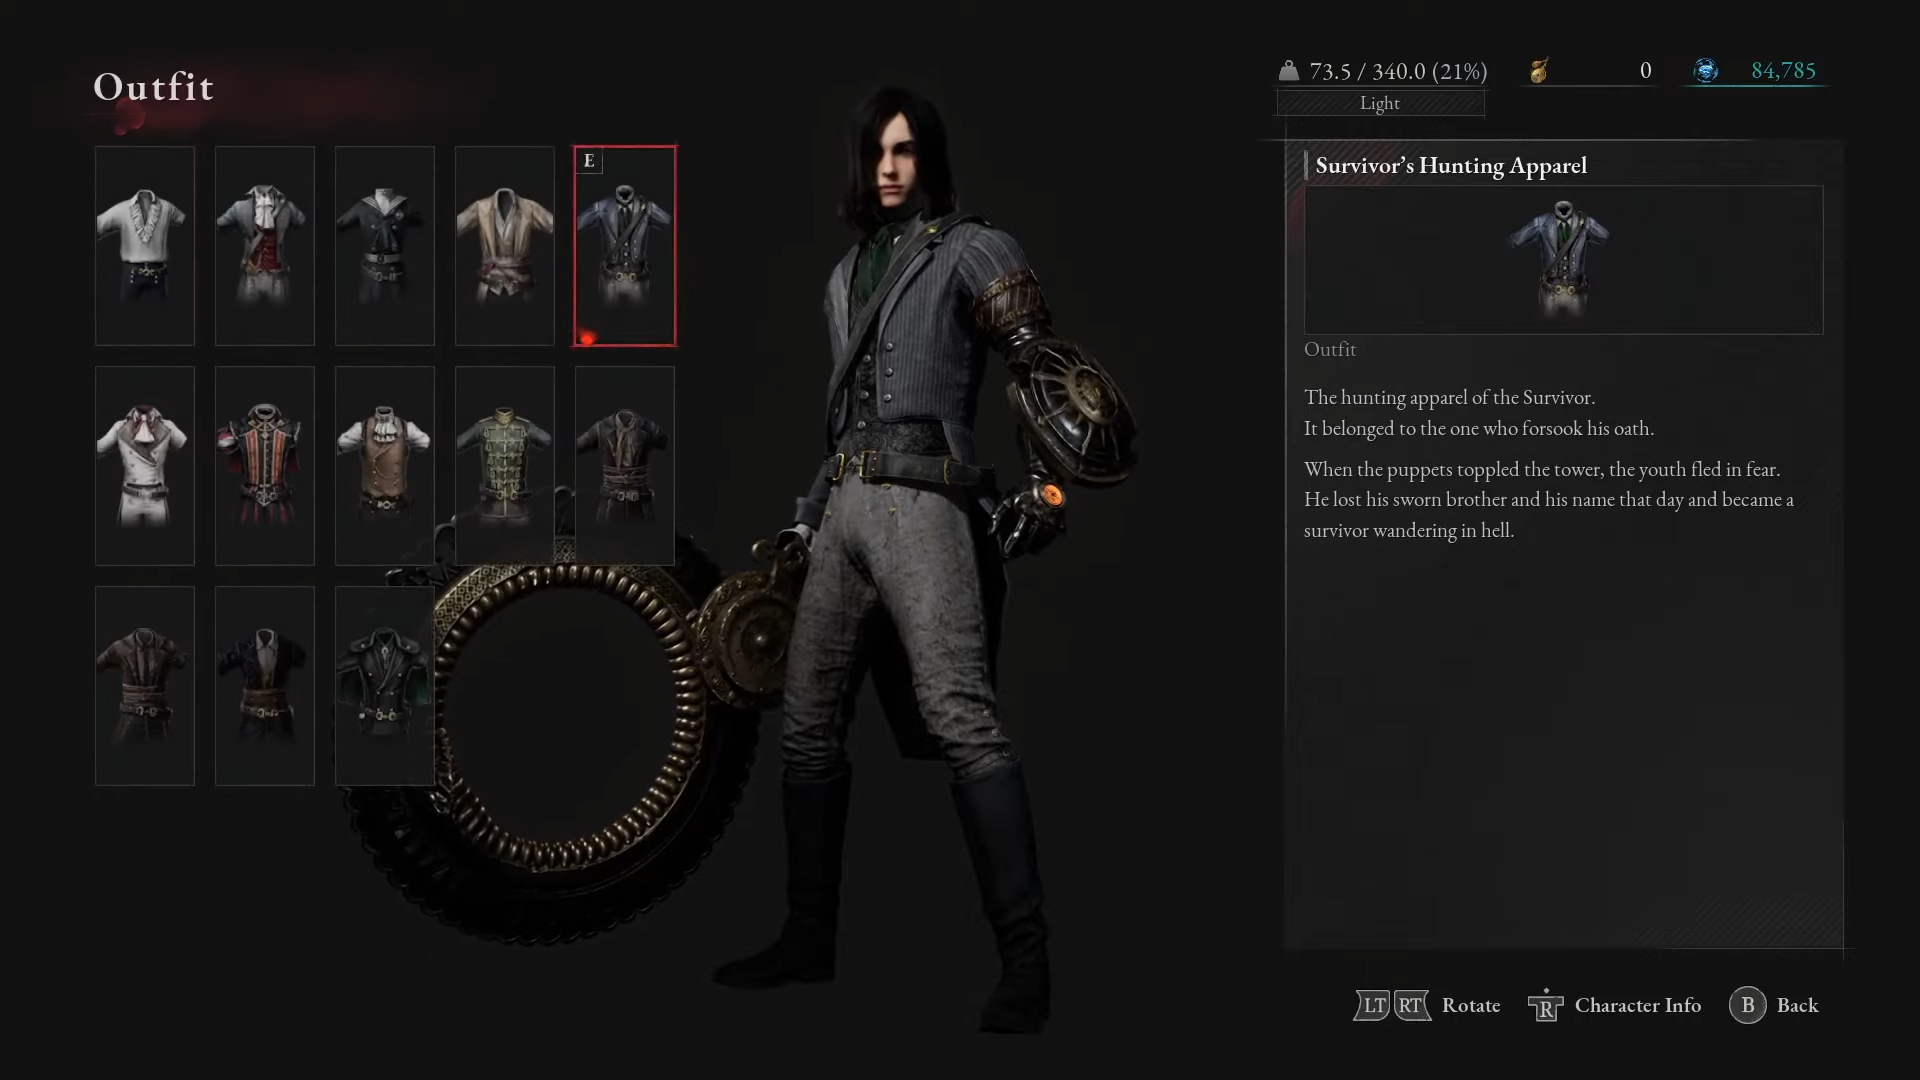 How to change character appearance (Shirt, Pants and Accessories